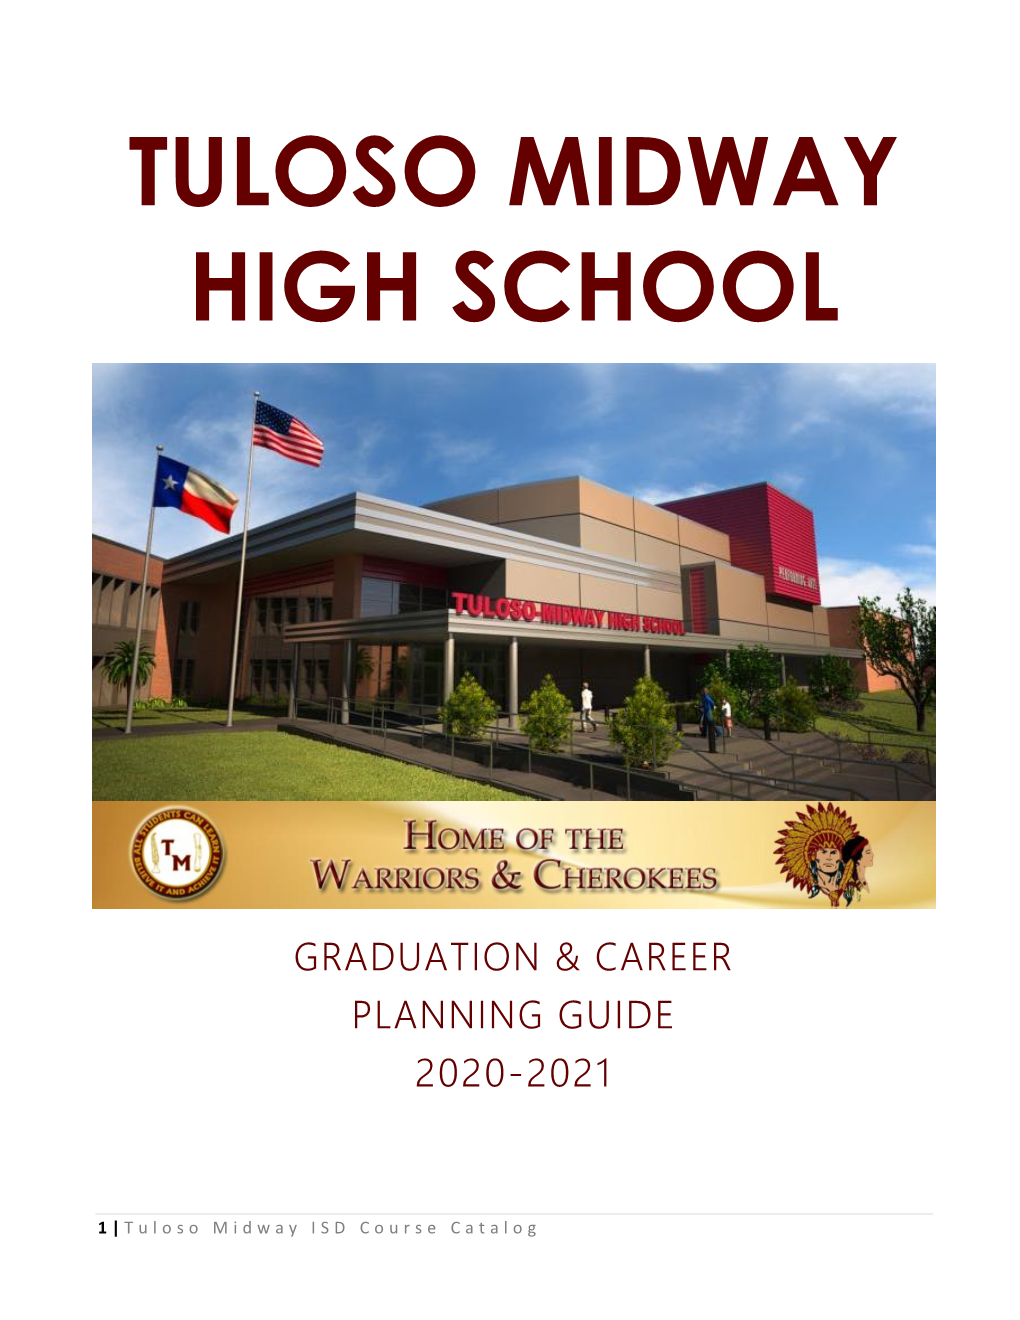 Tuloso Midway High School